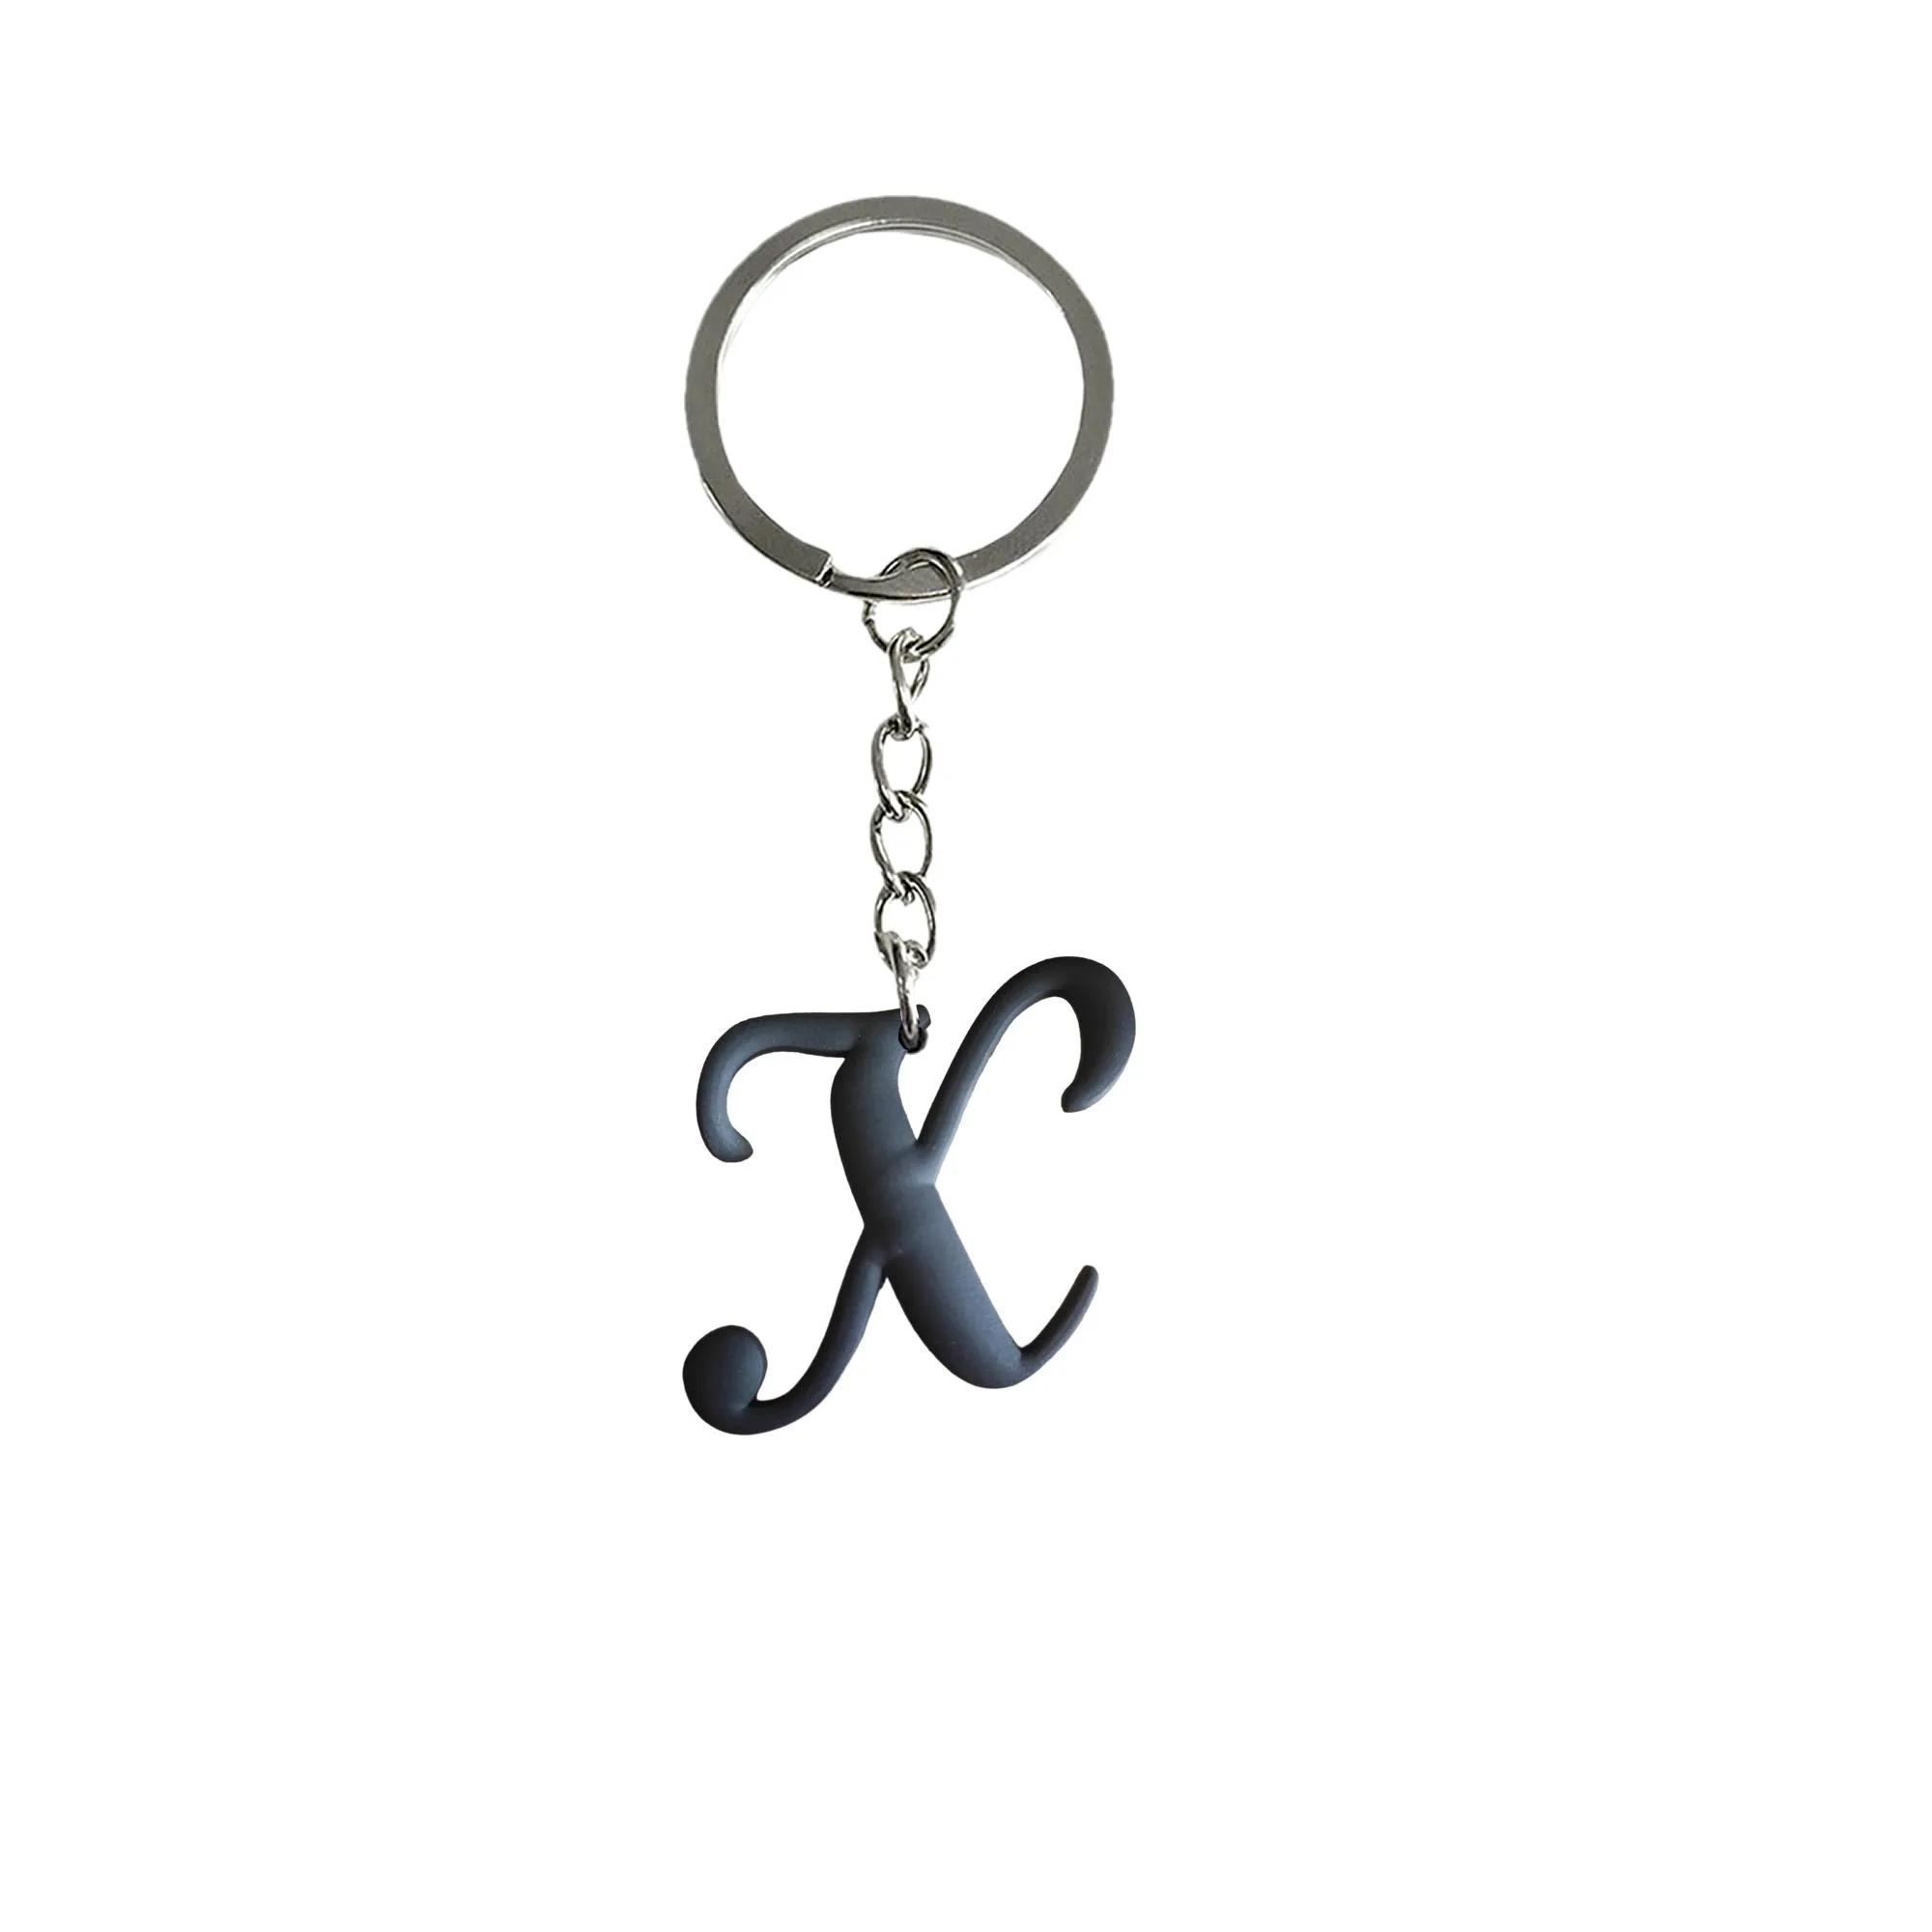 black large letters keychain keyring for school bags backpack key ring boys keychains tags goodie bag stuffer christmas gifts and holiday charms suitable schoolbag women stuffers supplies car